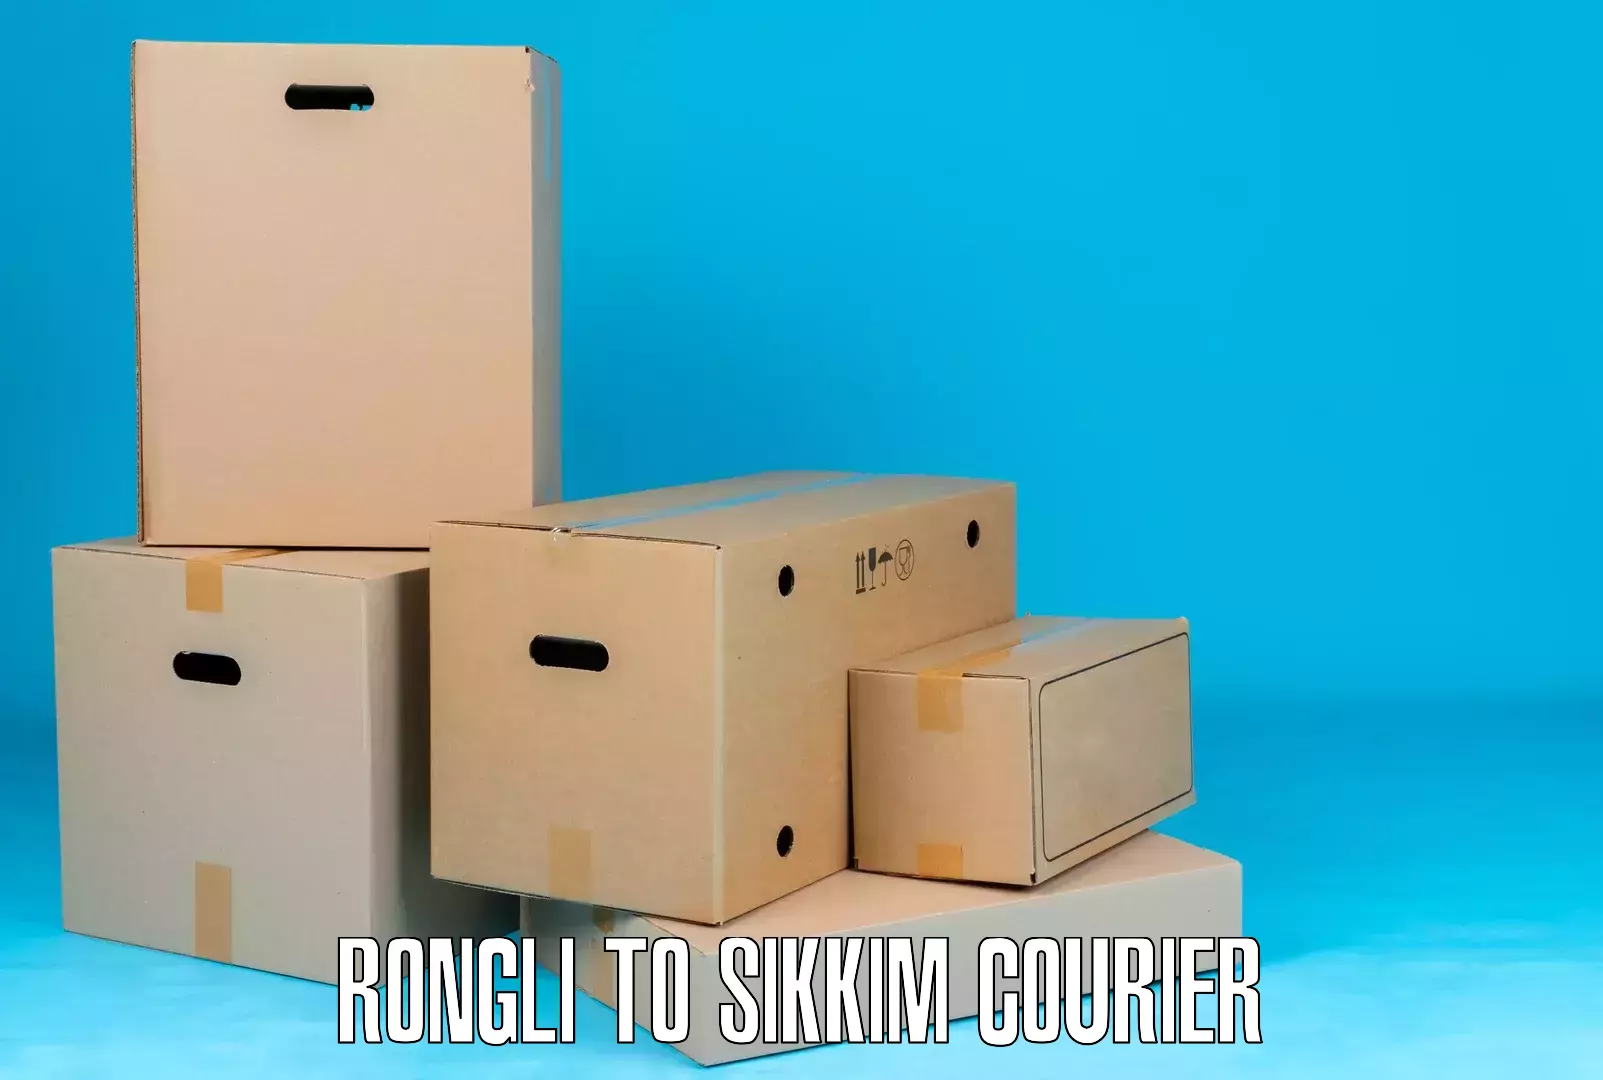 State-of-the-art courier technology Rongli to Rongli